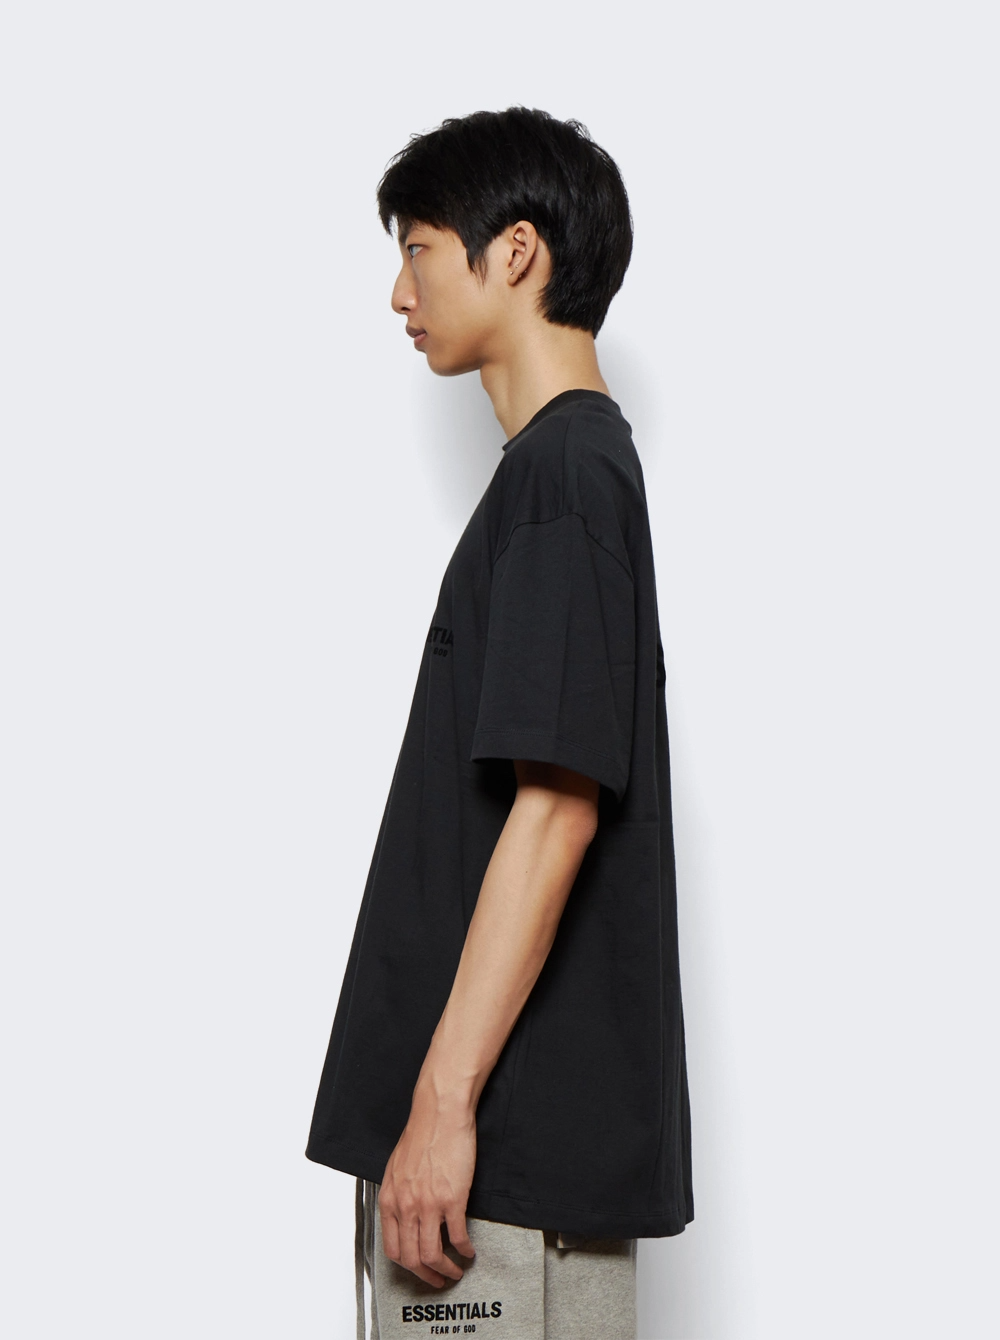 Fear of God ESSENTIALS Short Sleeve Tee 'Stretch Limo'